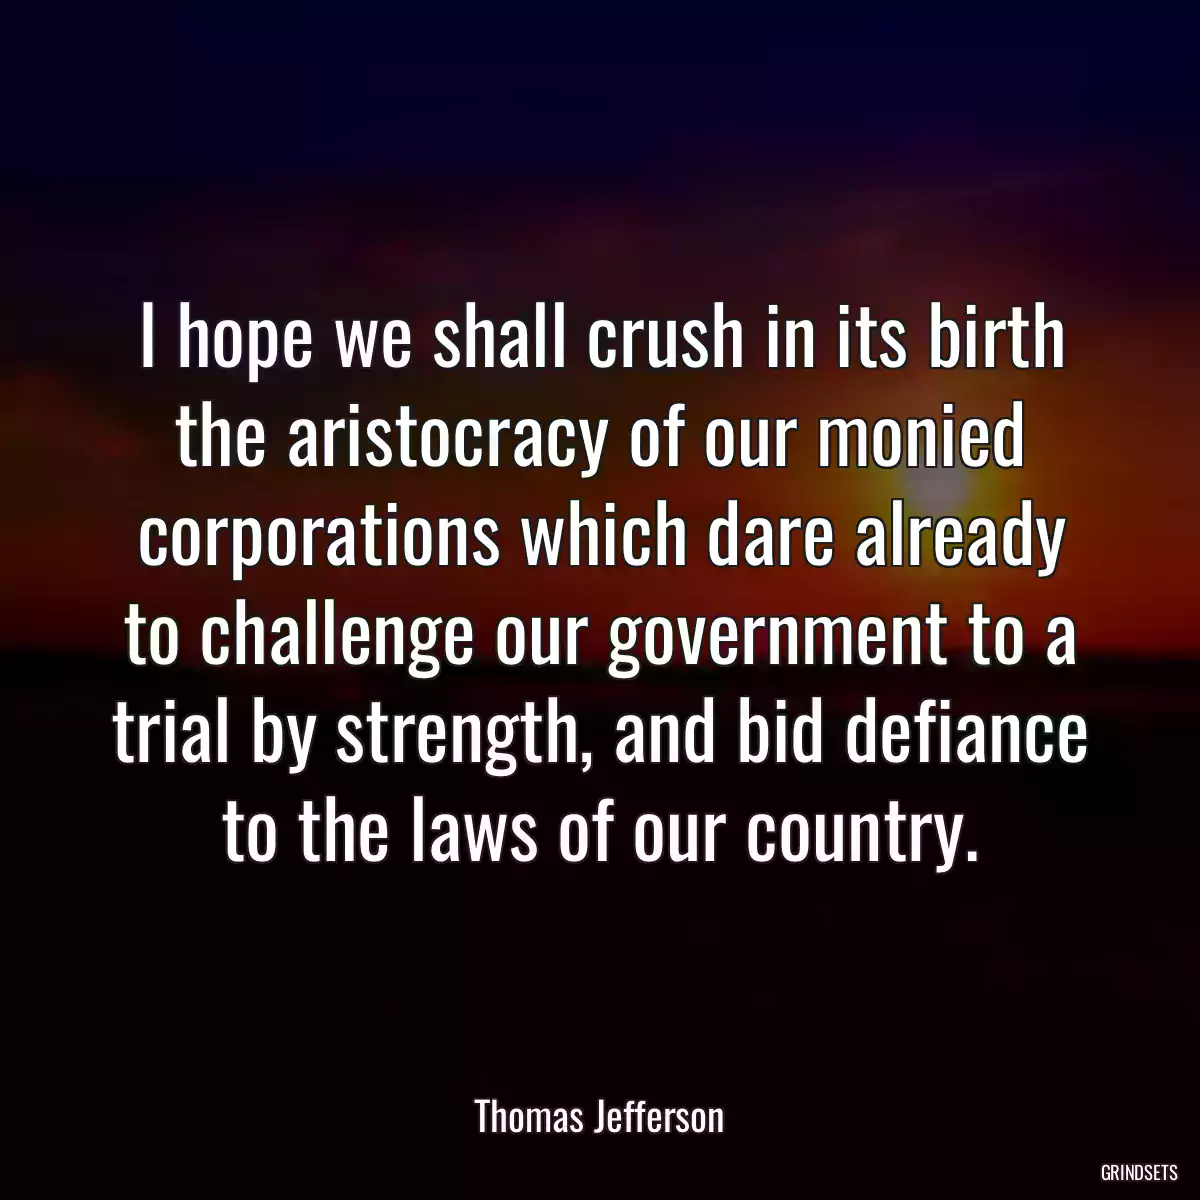 I hope we shall crush in its birth the aristocracy of our monied corporations which dare already to challenge our government to a trial by strength, and bid defiance to the laws of our country.